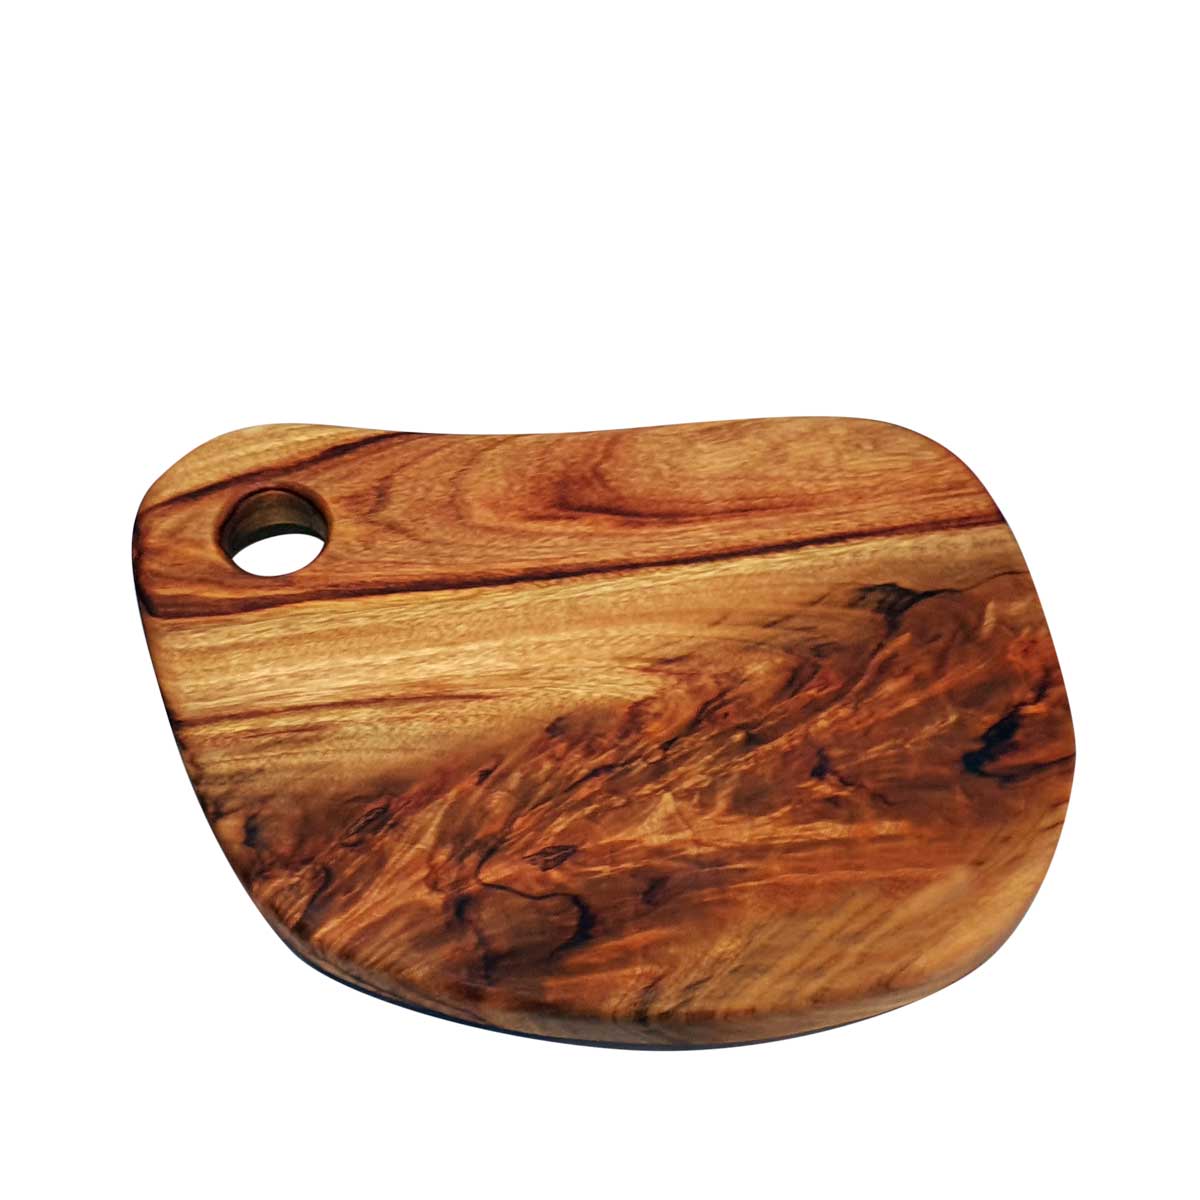 A gorgeous, medium sized freeform wooden cutting and chopping board from Nature's Boards, the beautiful camphor laurel timber grains and a variety of colours and tones show in the wood.